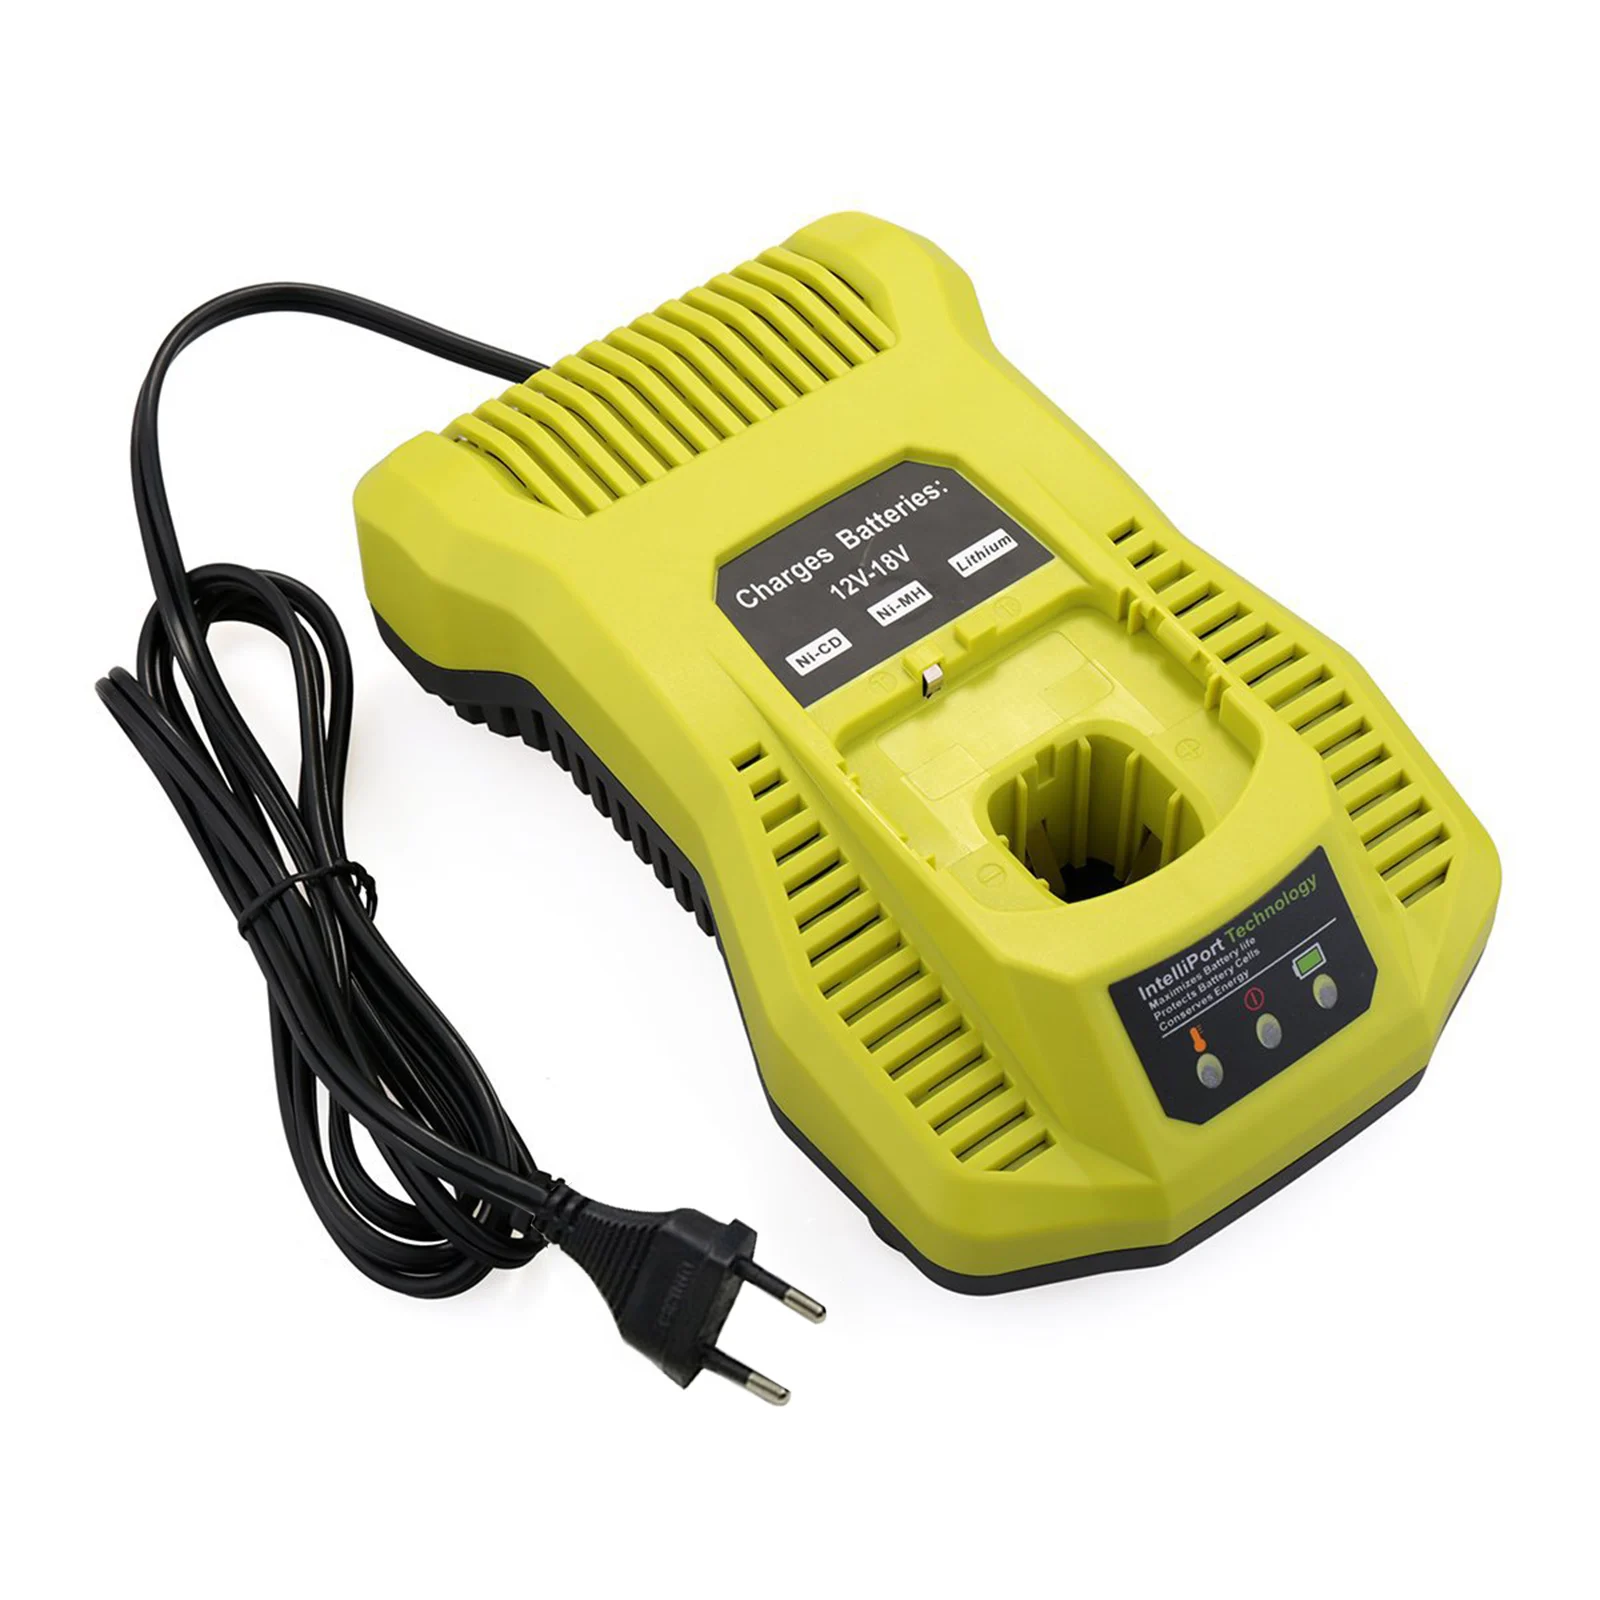 Ryobi ONE P118 18V NiCd Lithium Ion Battery Charger for sale online 